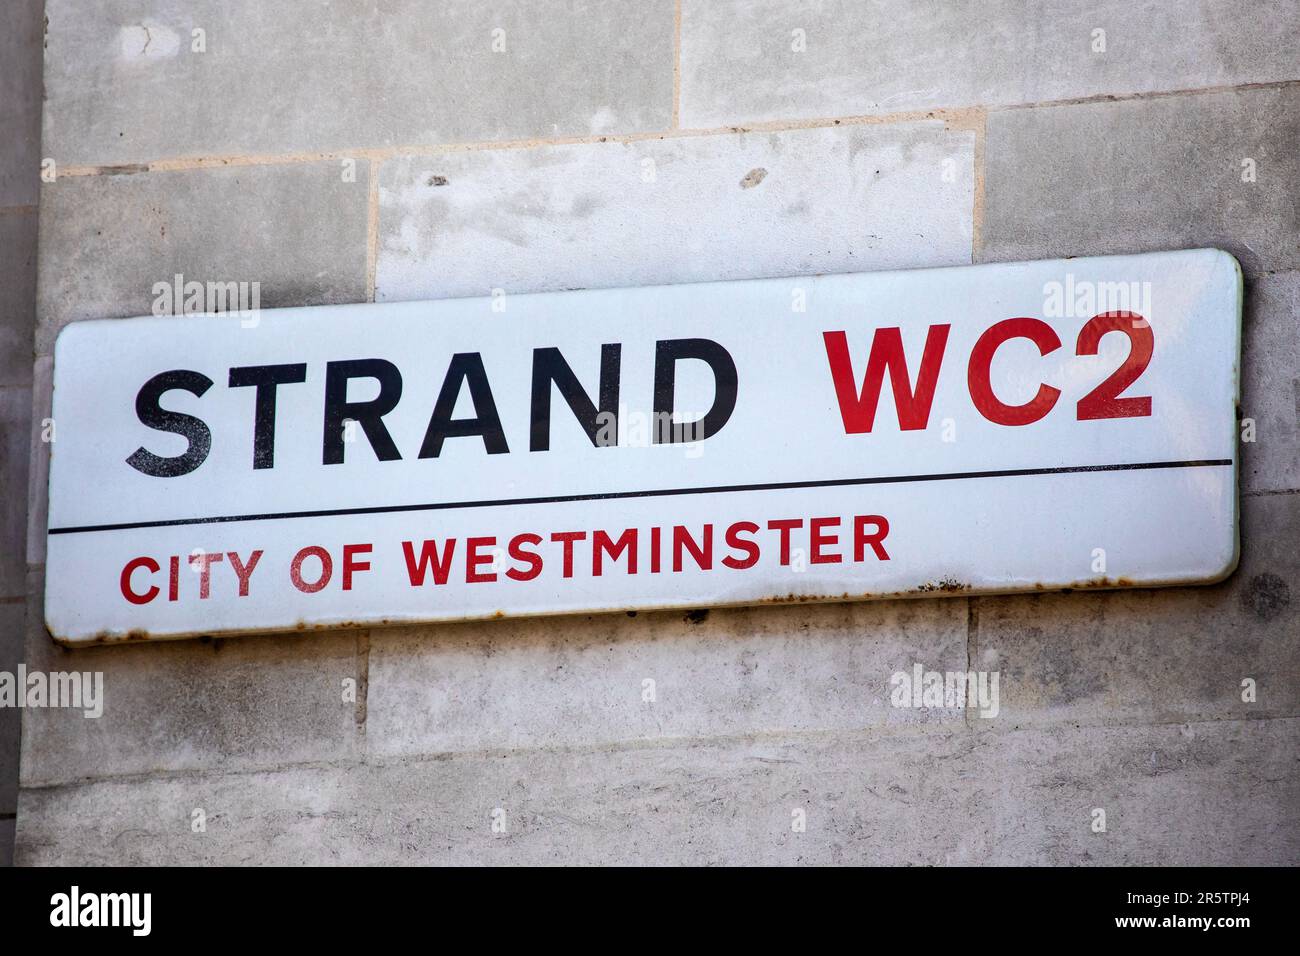 London, UK - April 20th 2023: Street sign for the Strand in the City of Westminster in London, UK. Stock Photo